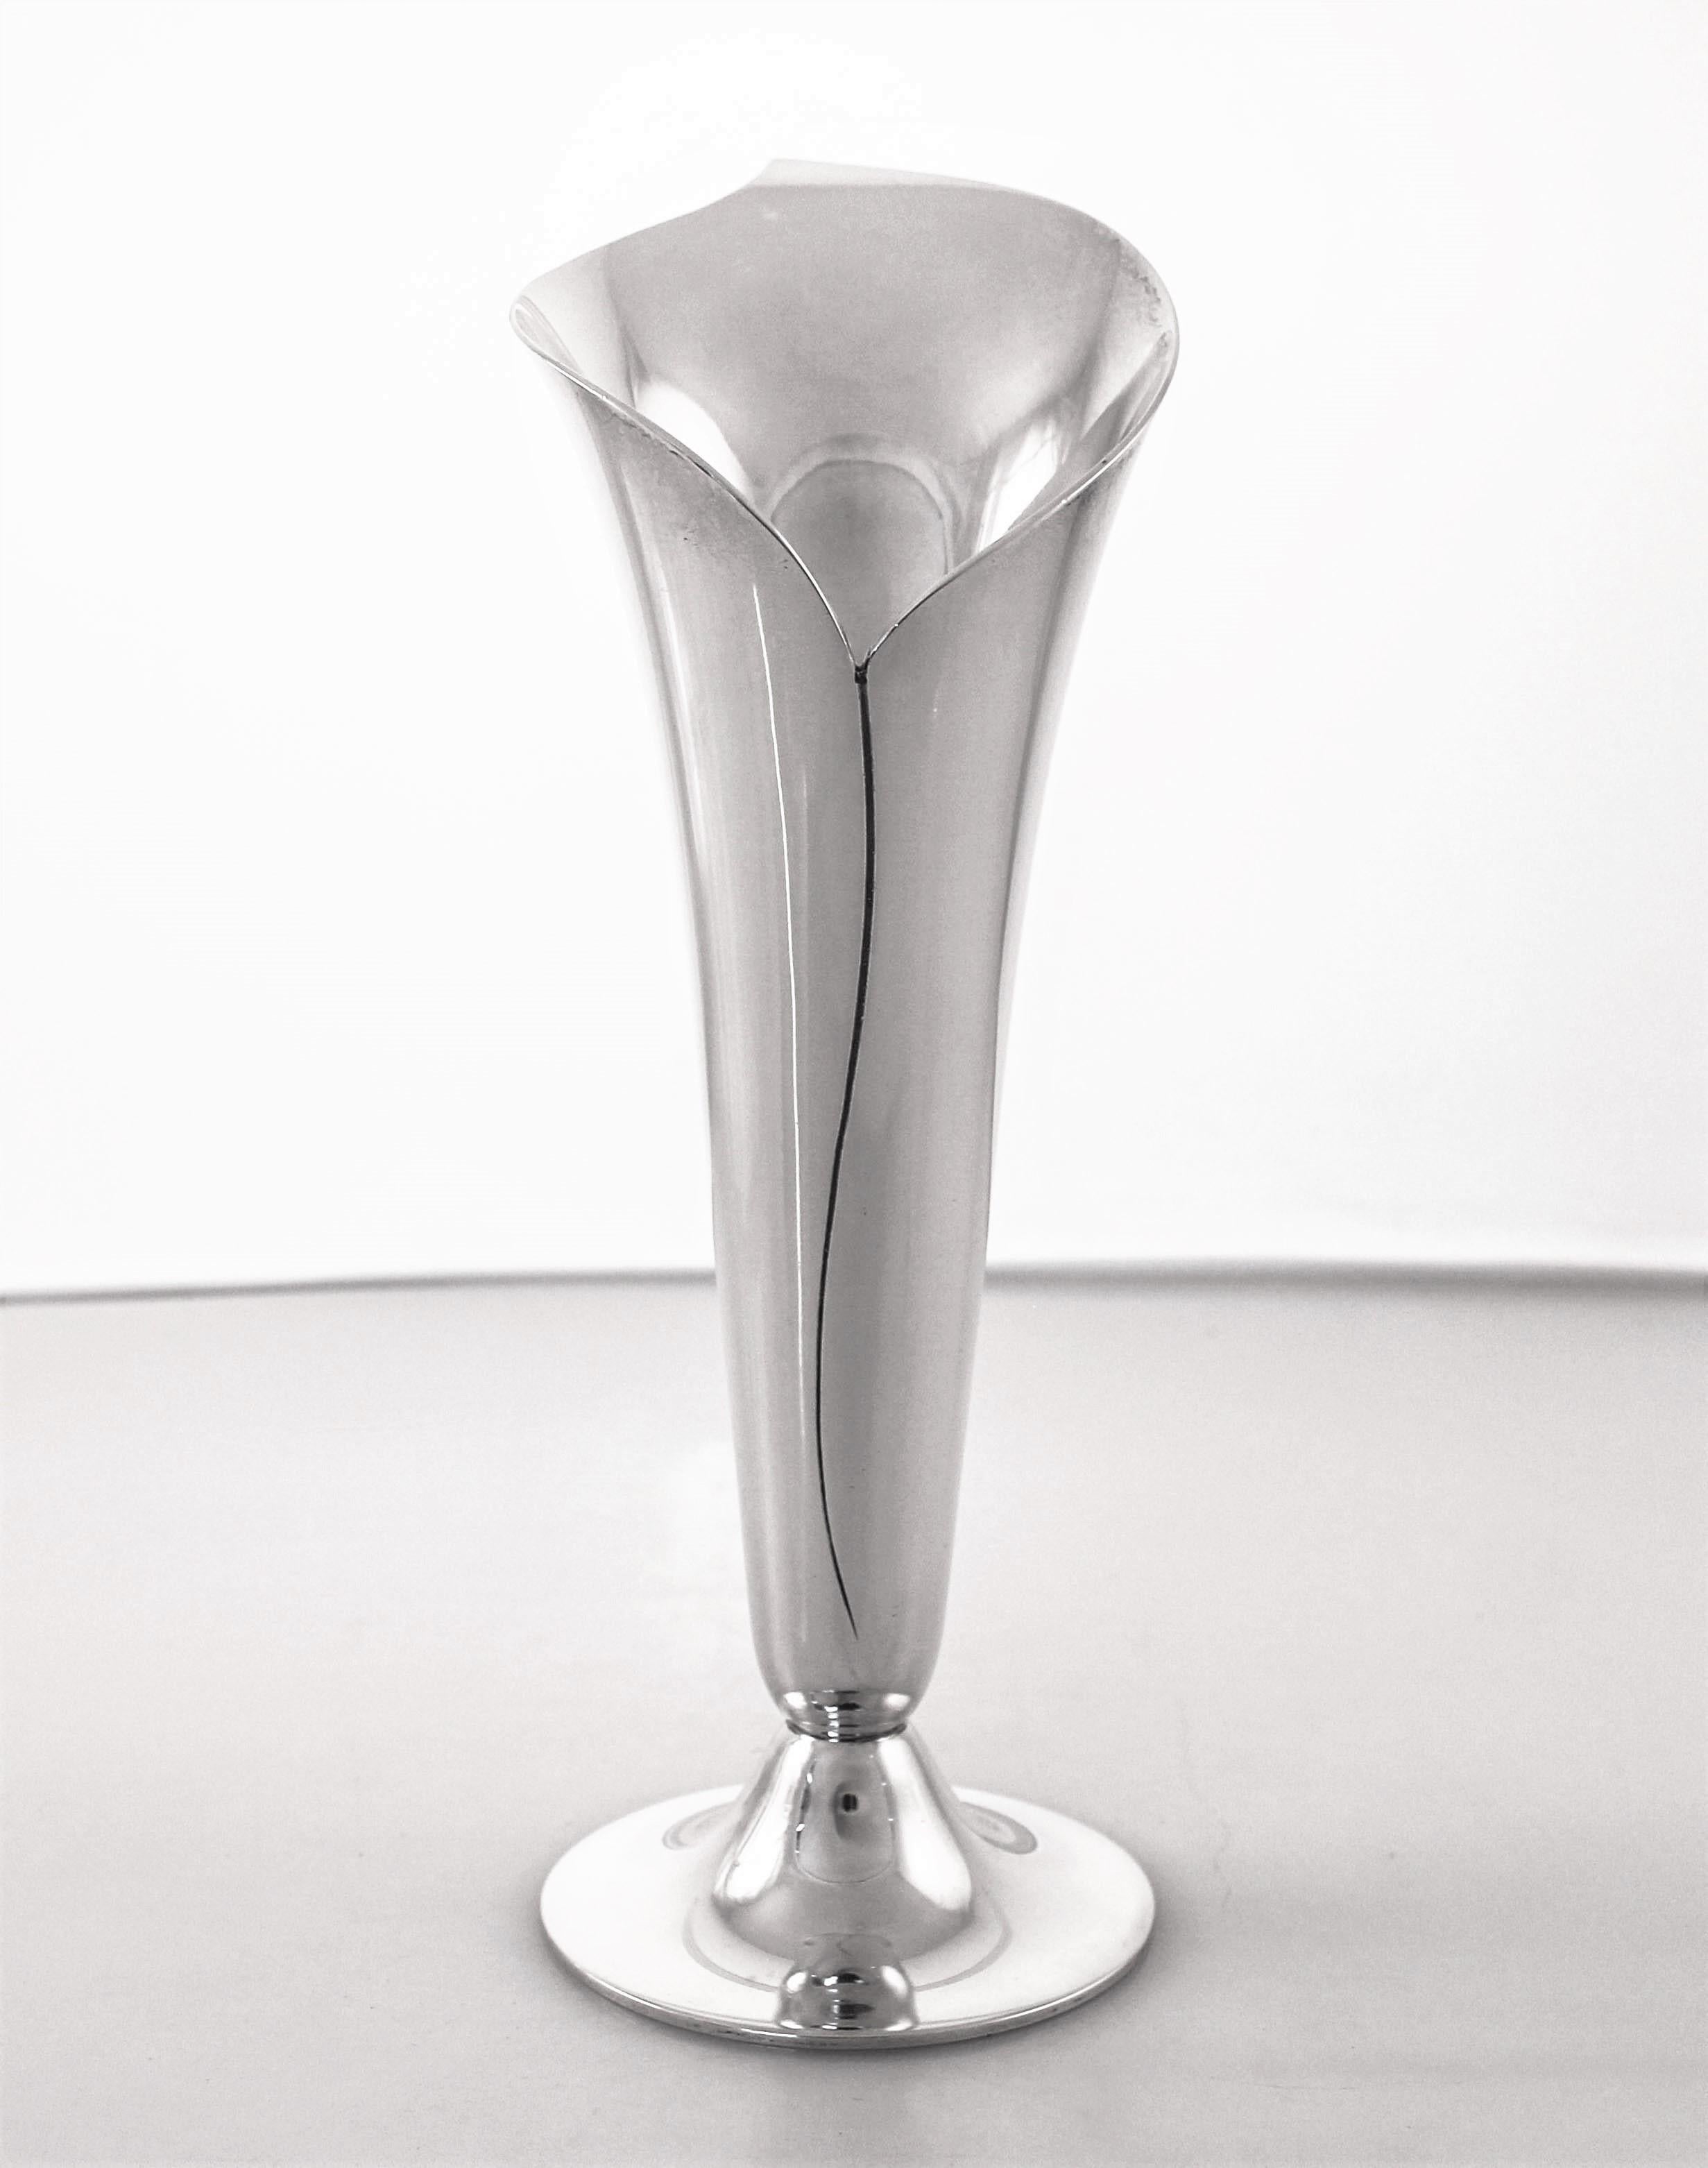 We are proud to offer this pair of midcentury sterling silver vases by Tiffany & Co. They have a sleek and modern design, like a Tulip. Elegant, sophisticated and timeless; exactly what you would expect from Tiffany’s!